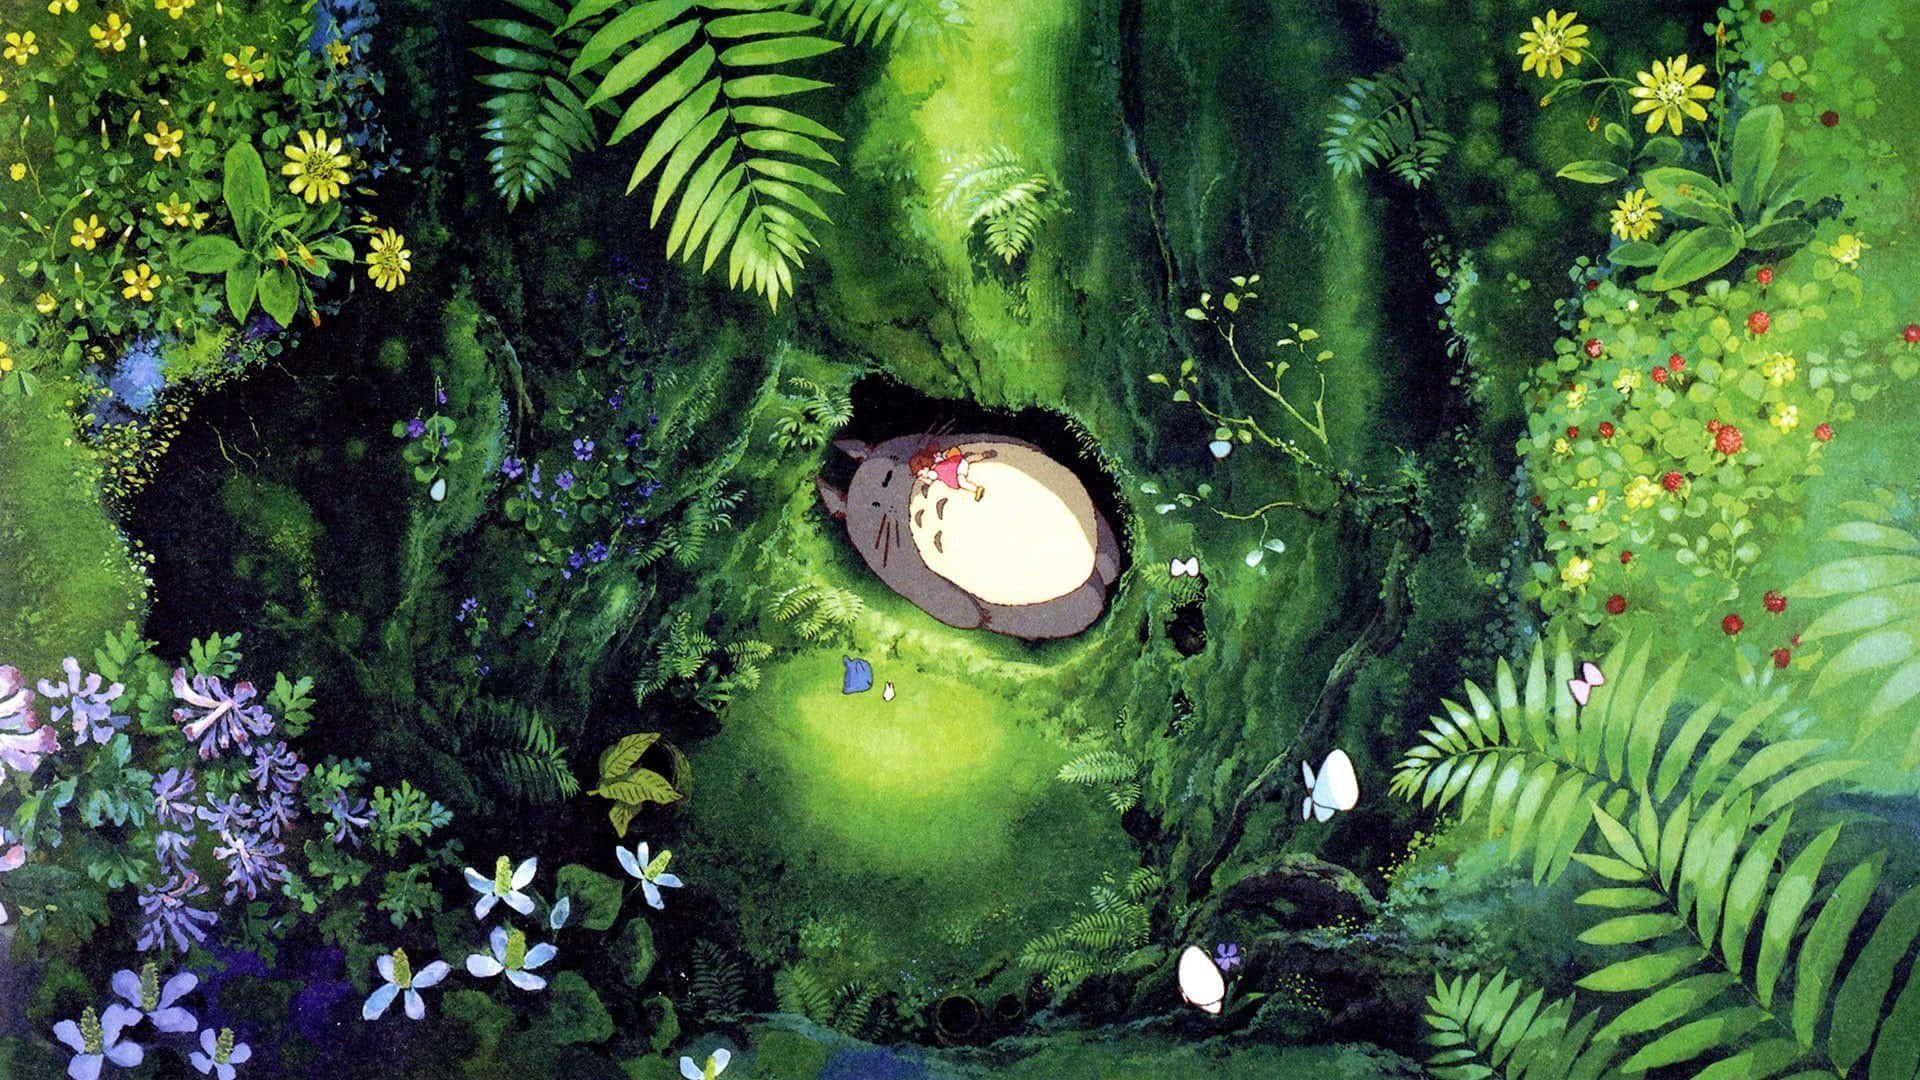 Totoro, Mei, and friends in the magical forest Wallpaper